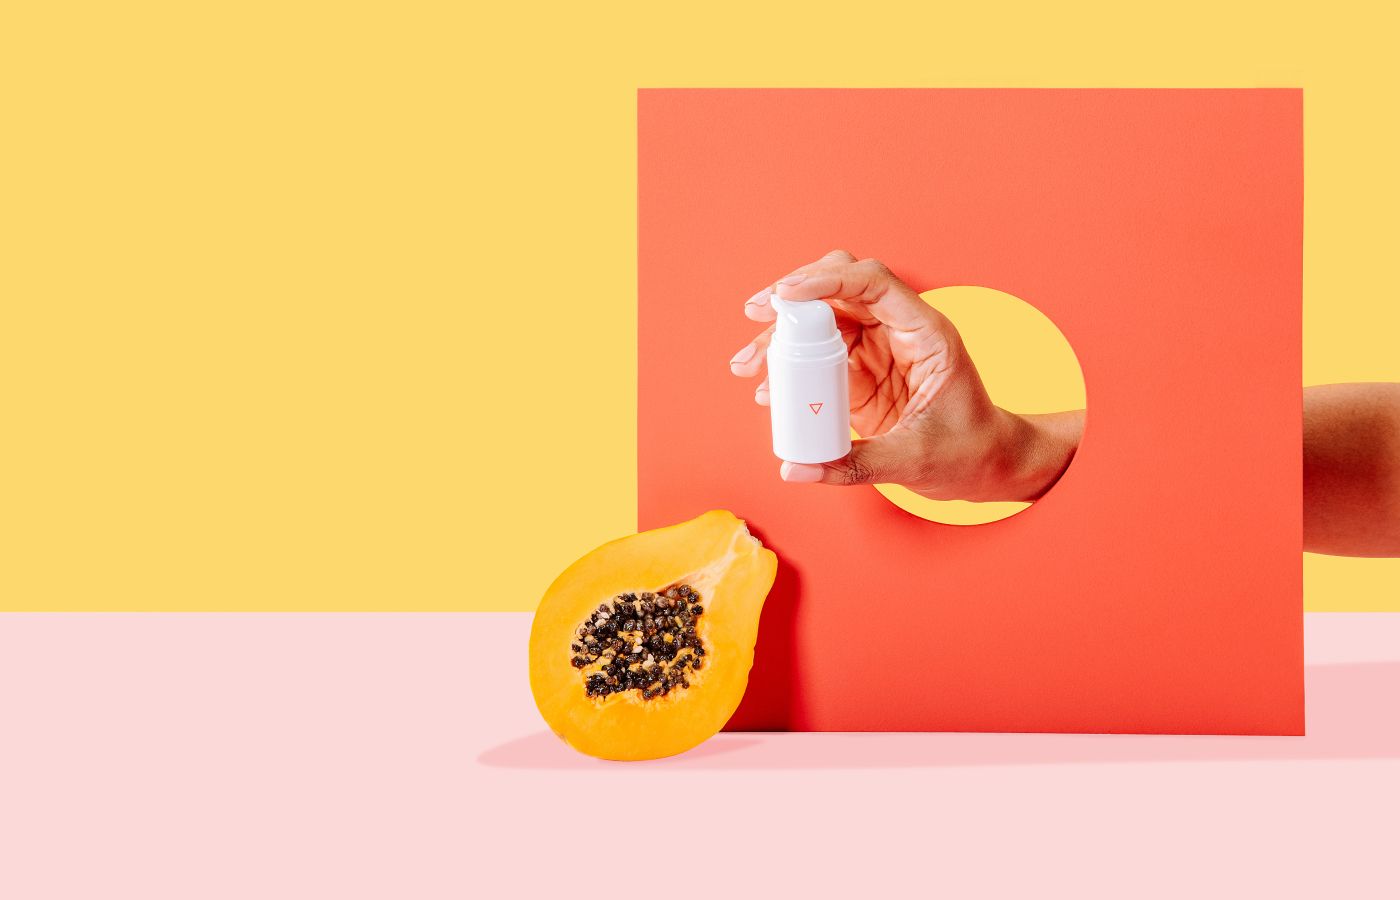 Hand holding a bottle of Wisp Estradiol Cream on pink and yellow background with papaya fruit